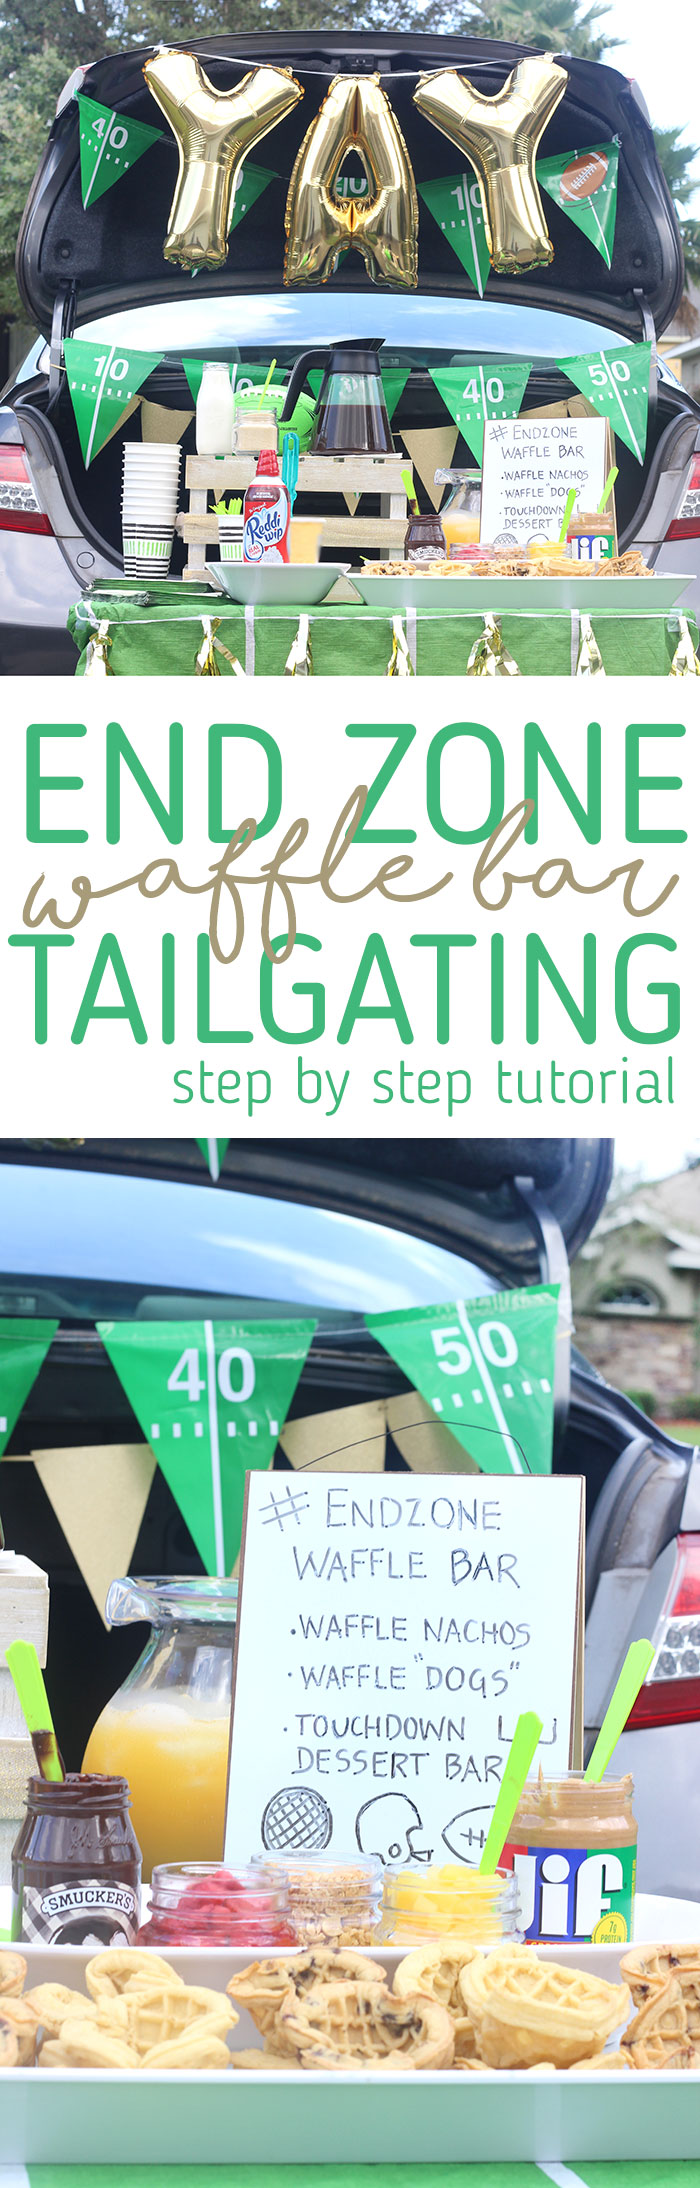 Waffle Bar for Tailgating. Unique Ideas You Need To Try.